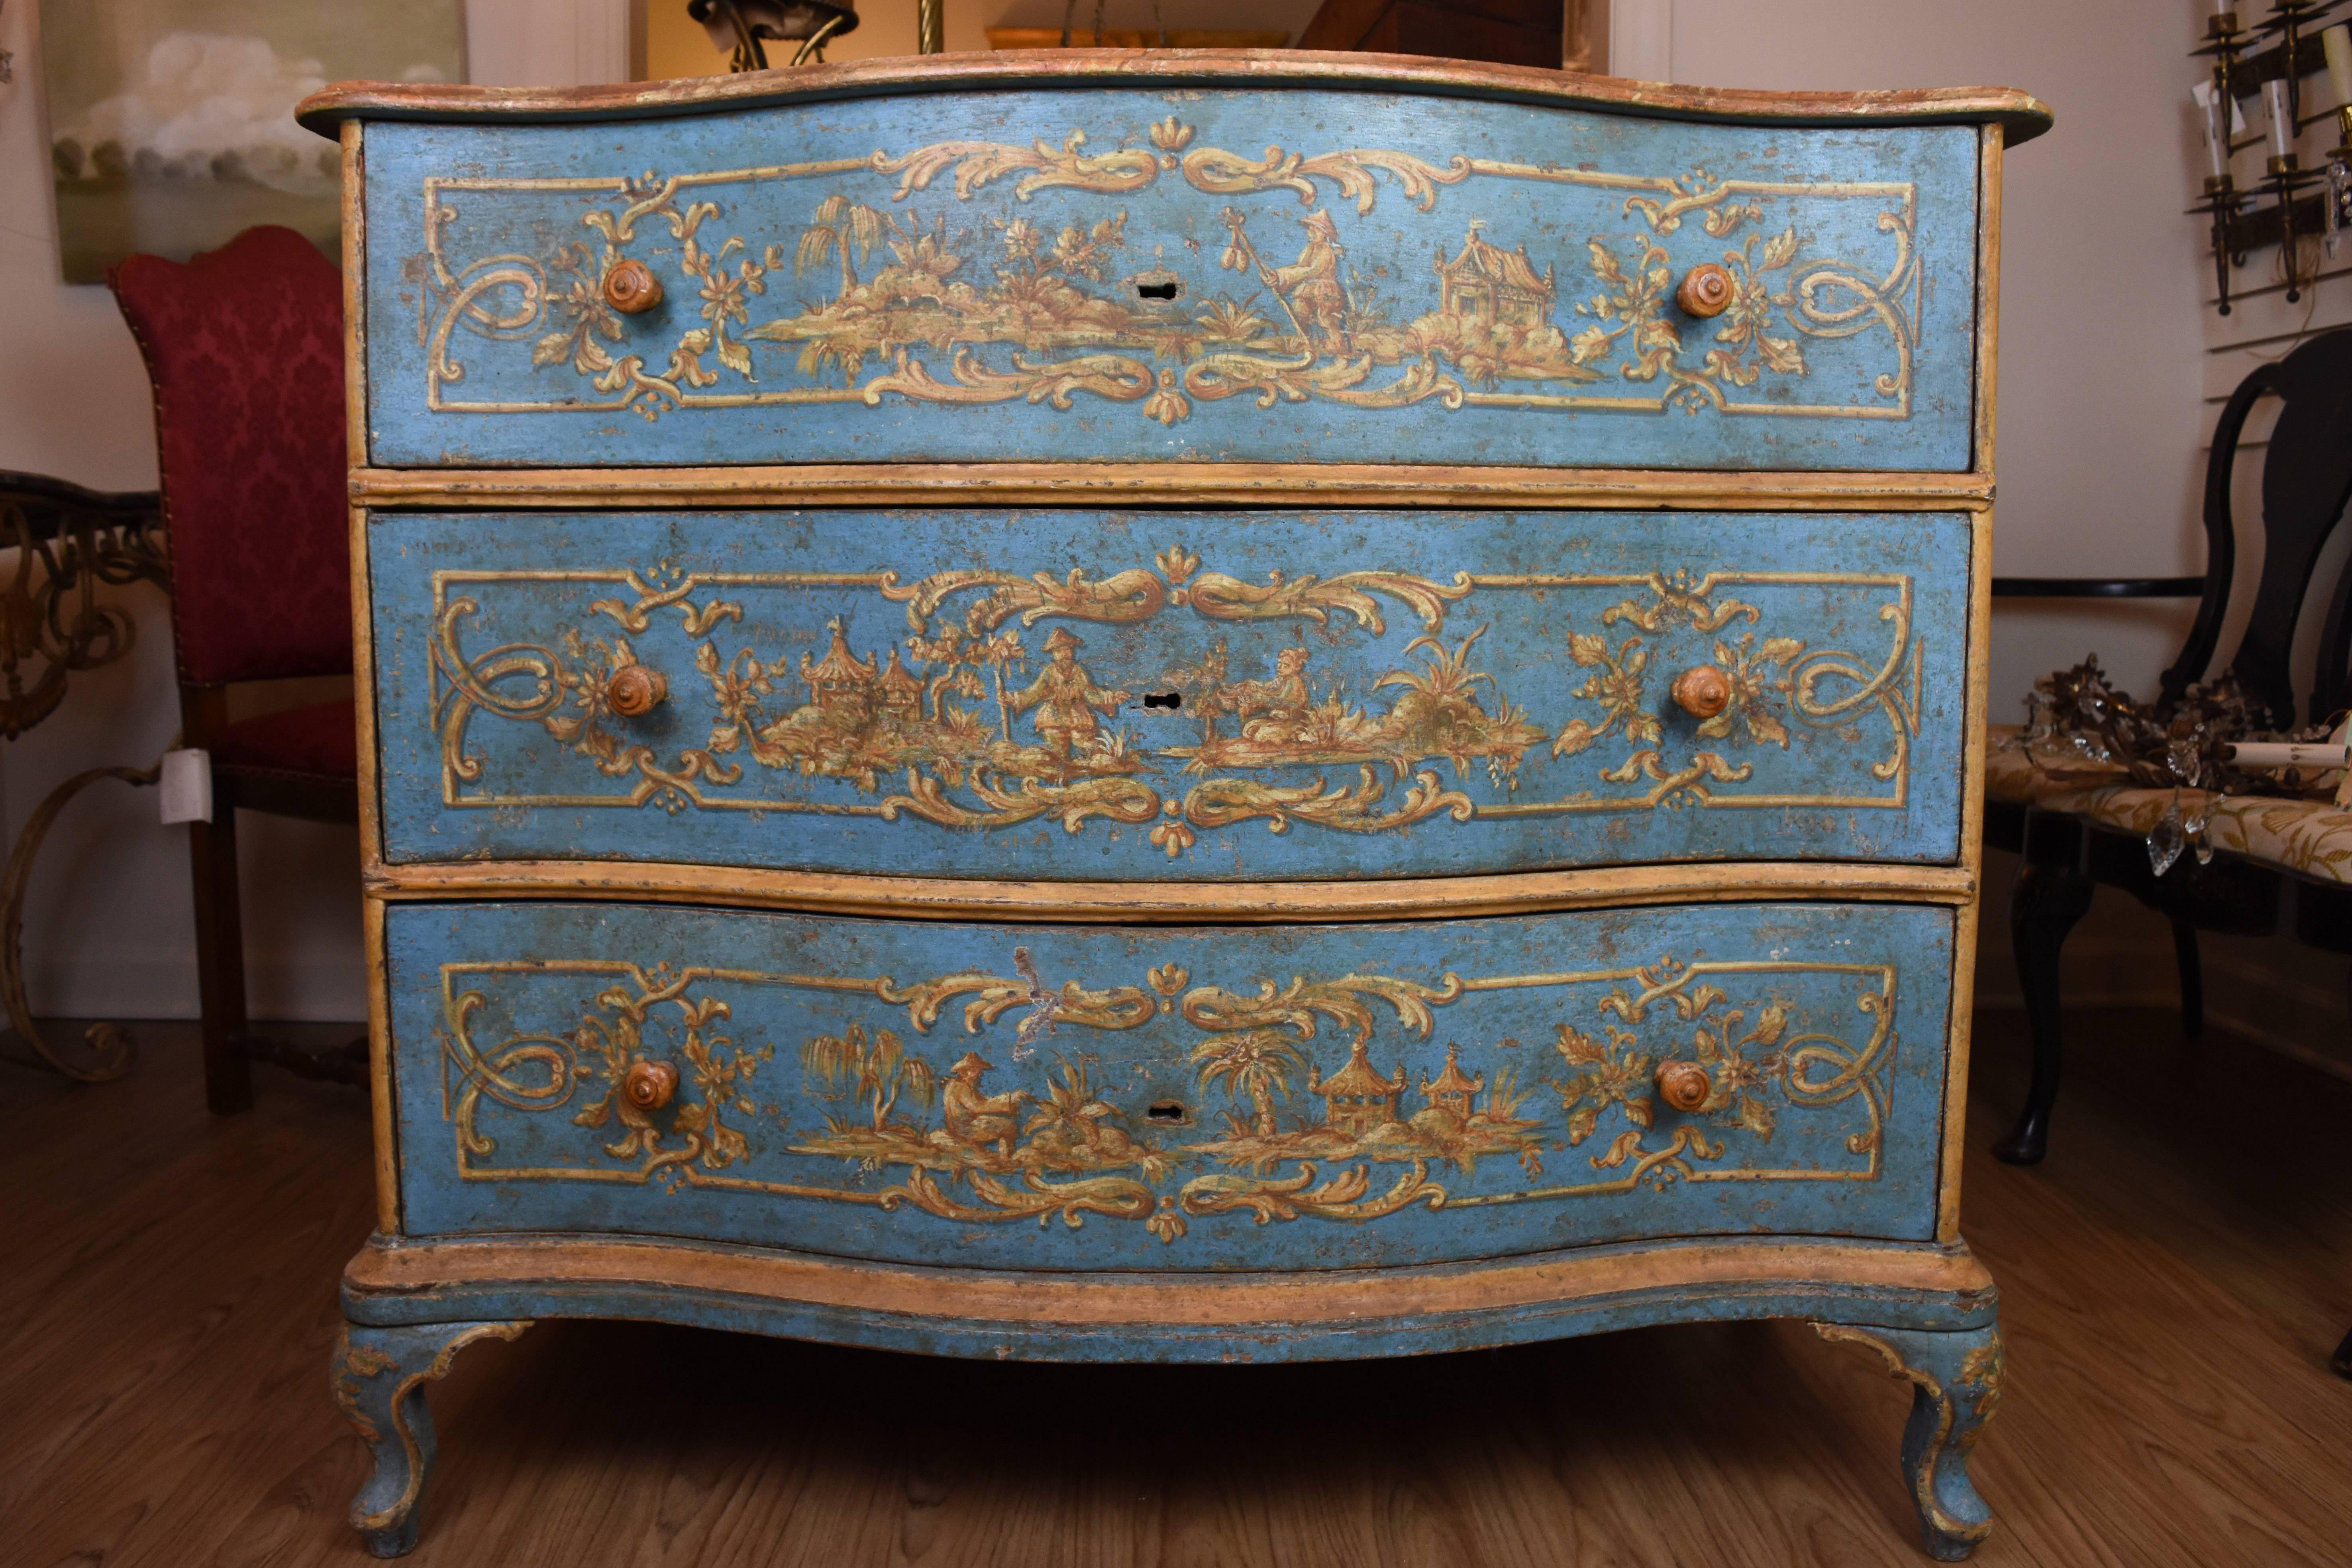 This exquisite 18th century Italian commode features a serpentine front with three functional drawers all hand-painted with chinoiserie decoration. The base color of the commode is blue with the top a faux marble design in shades of terracotta, gold